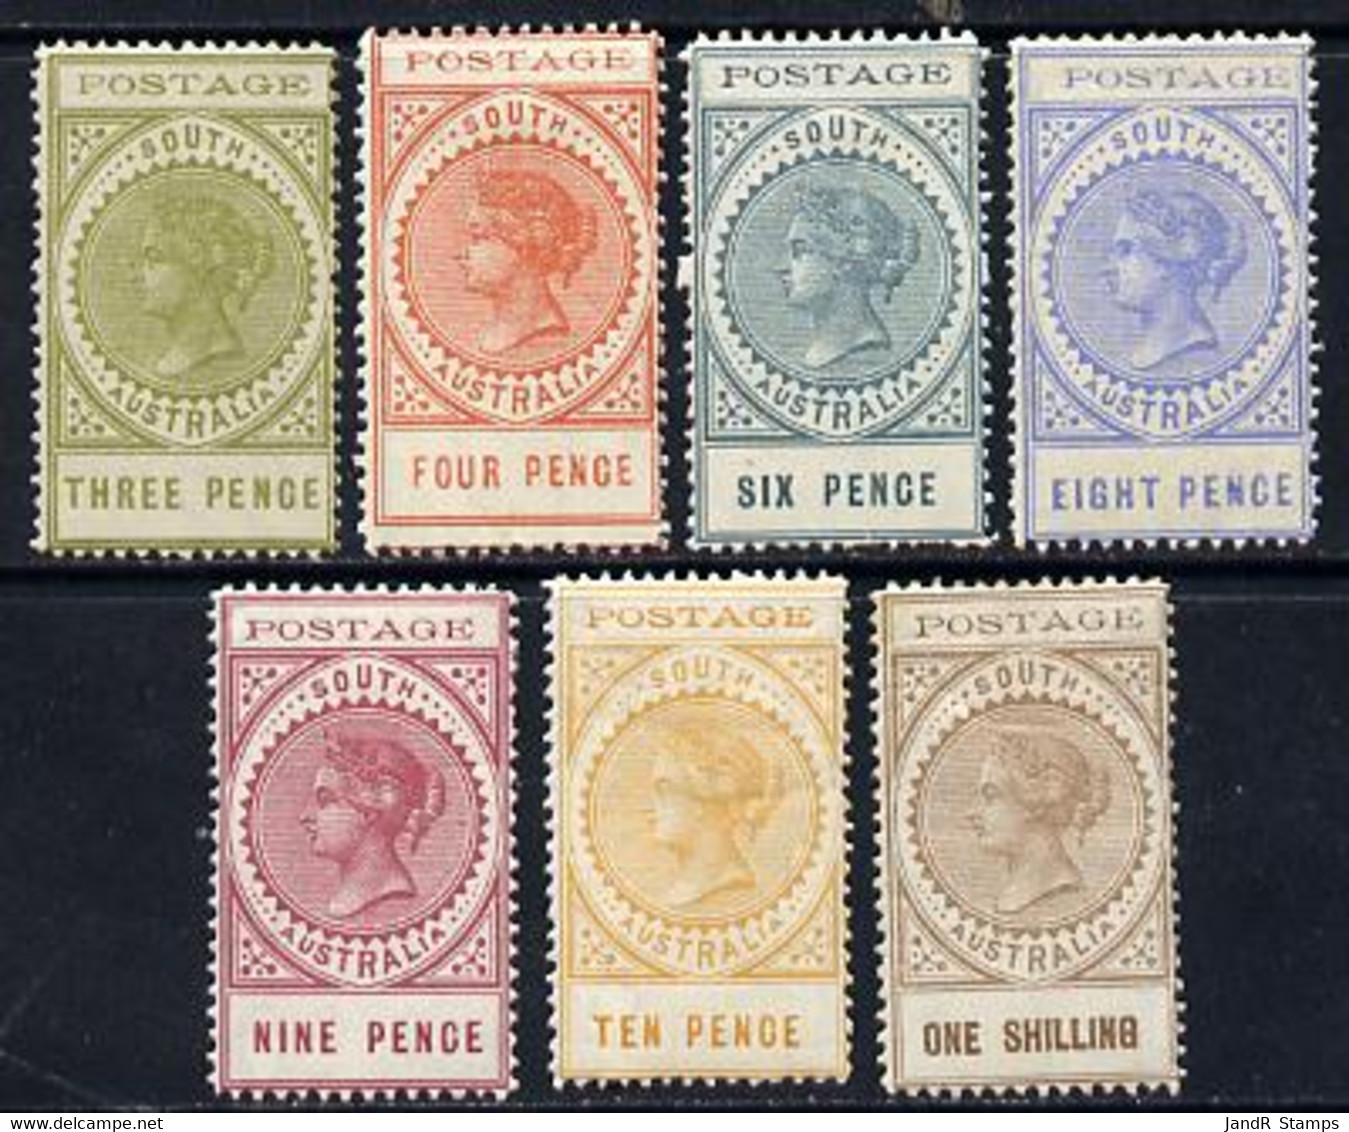 South Australia 1902-04 Thin Postage Set Of 7 Values To 1s (one Of Each Value) Mounted Mint SG 268-75 - Mint Stamps